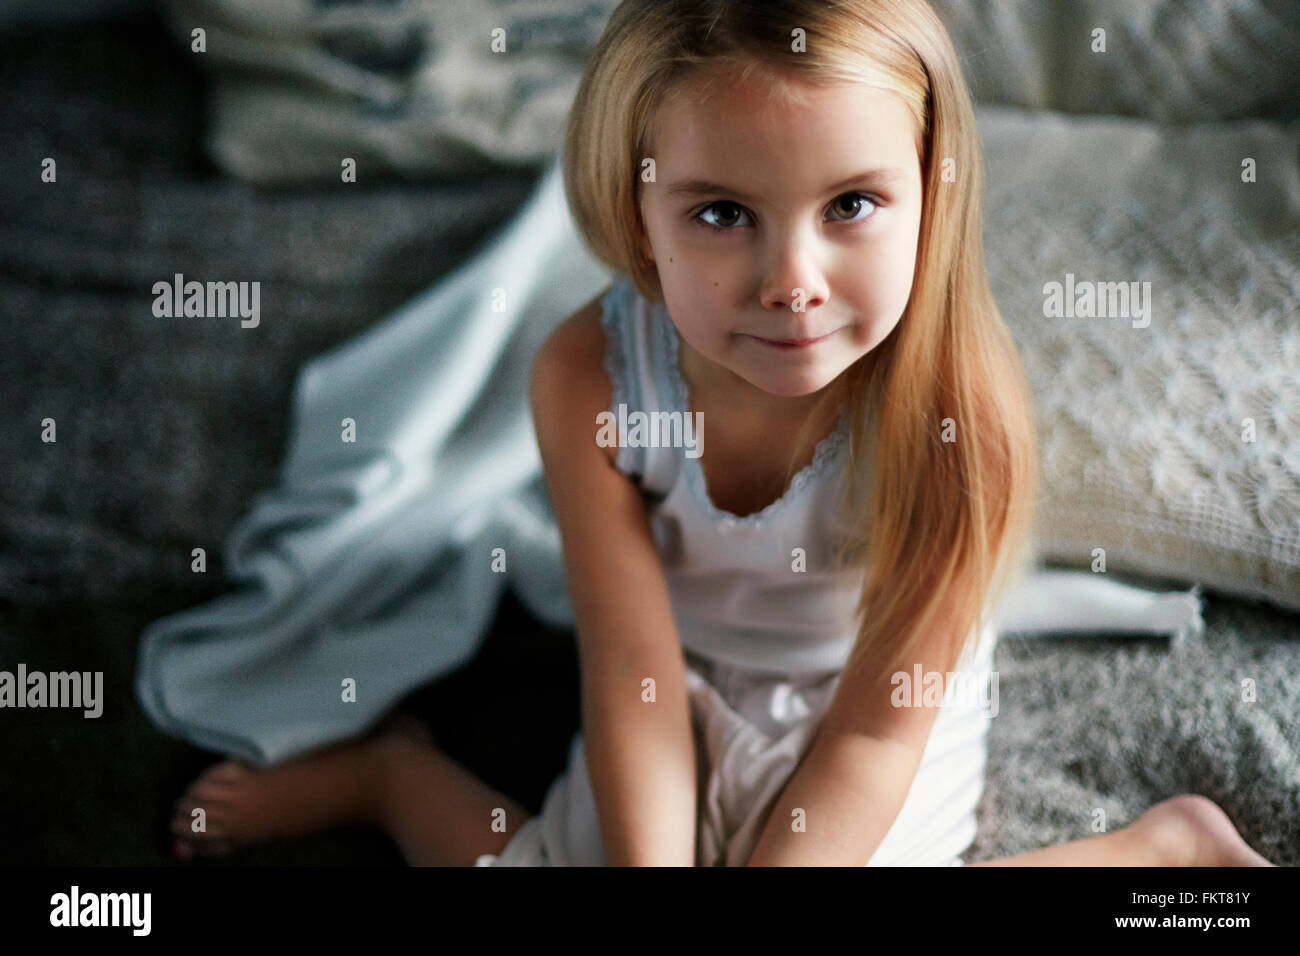 Caucasian girl smiling on bed Banque D'Images